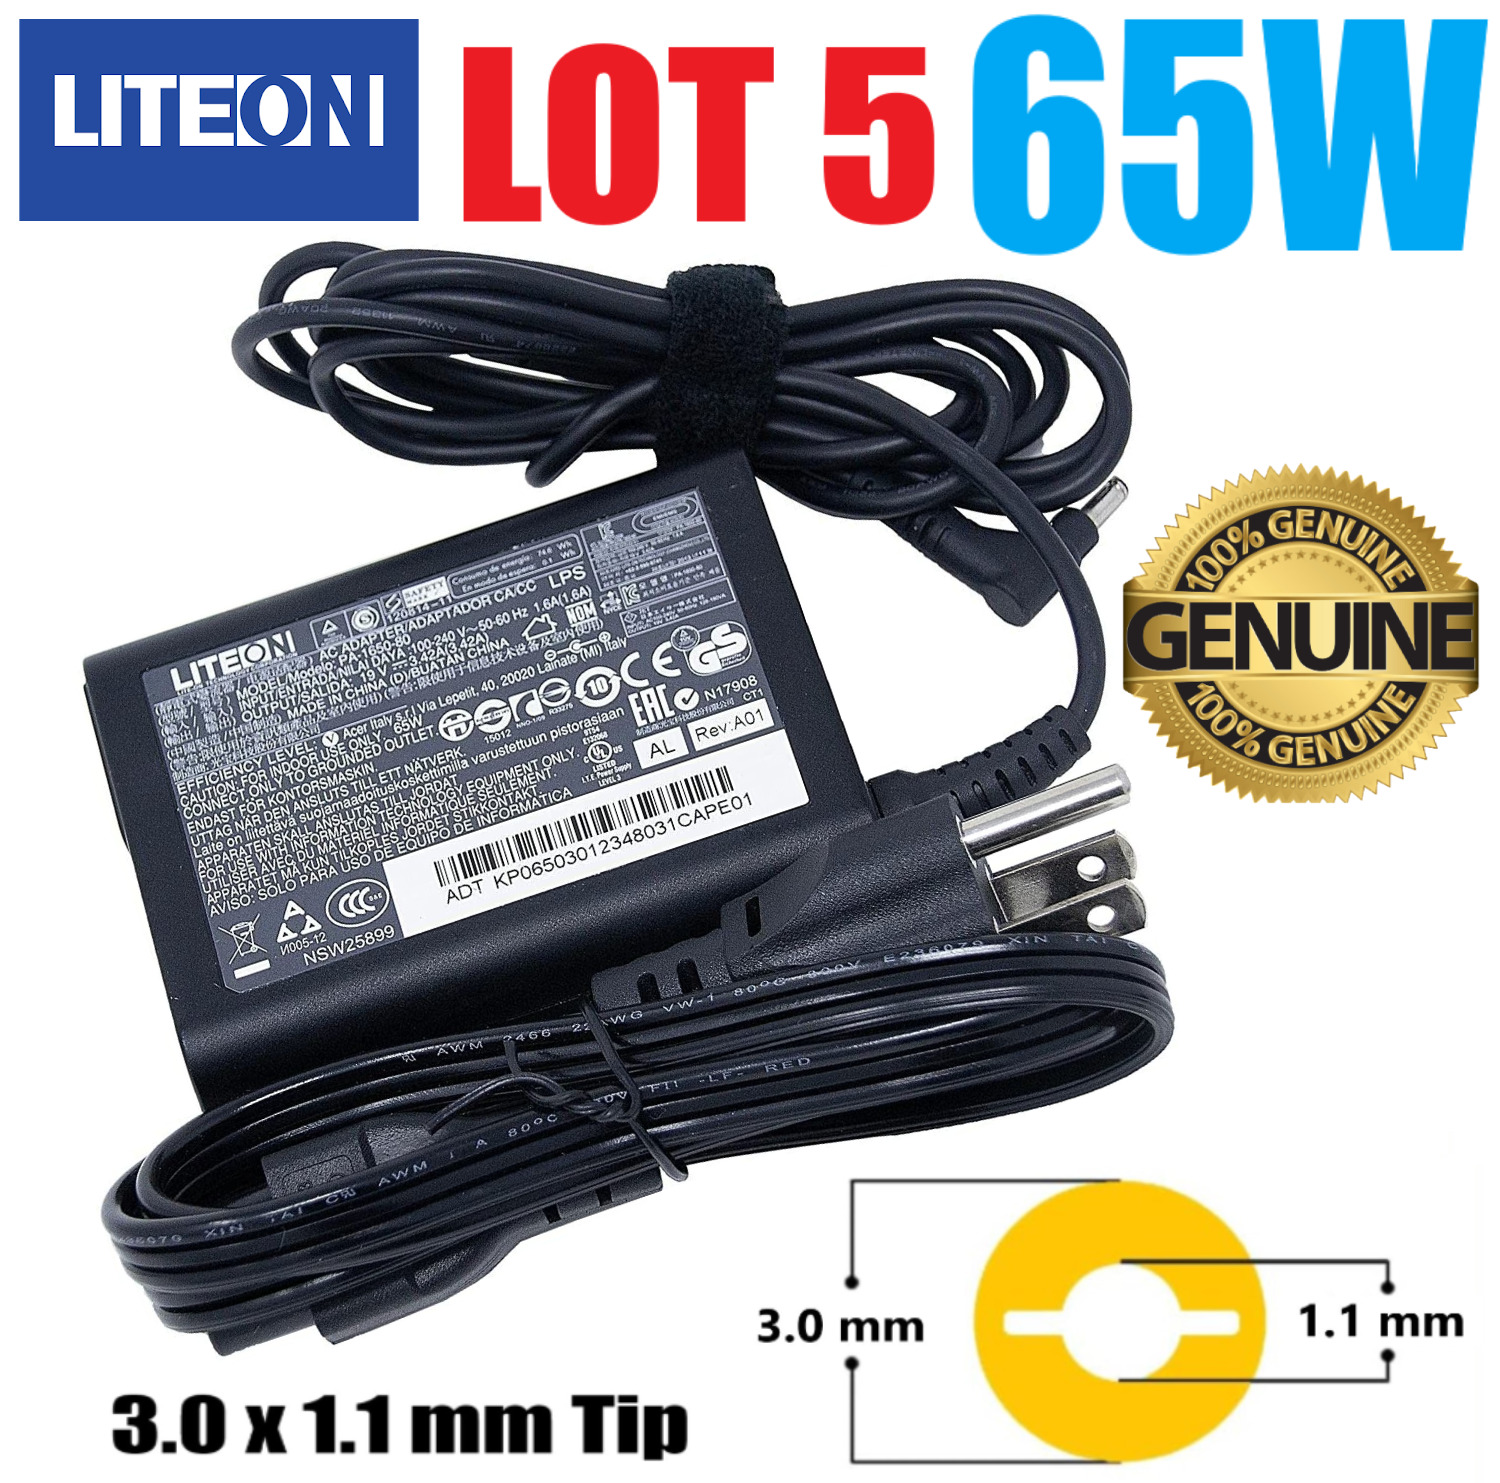 LOT 5 OEM LITEON 65W PA-1650-80 For Acer Samsung Chromebook AC Charger 3.0x1.1mm